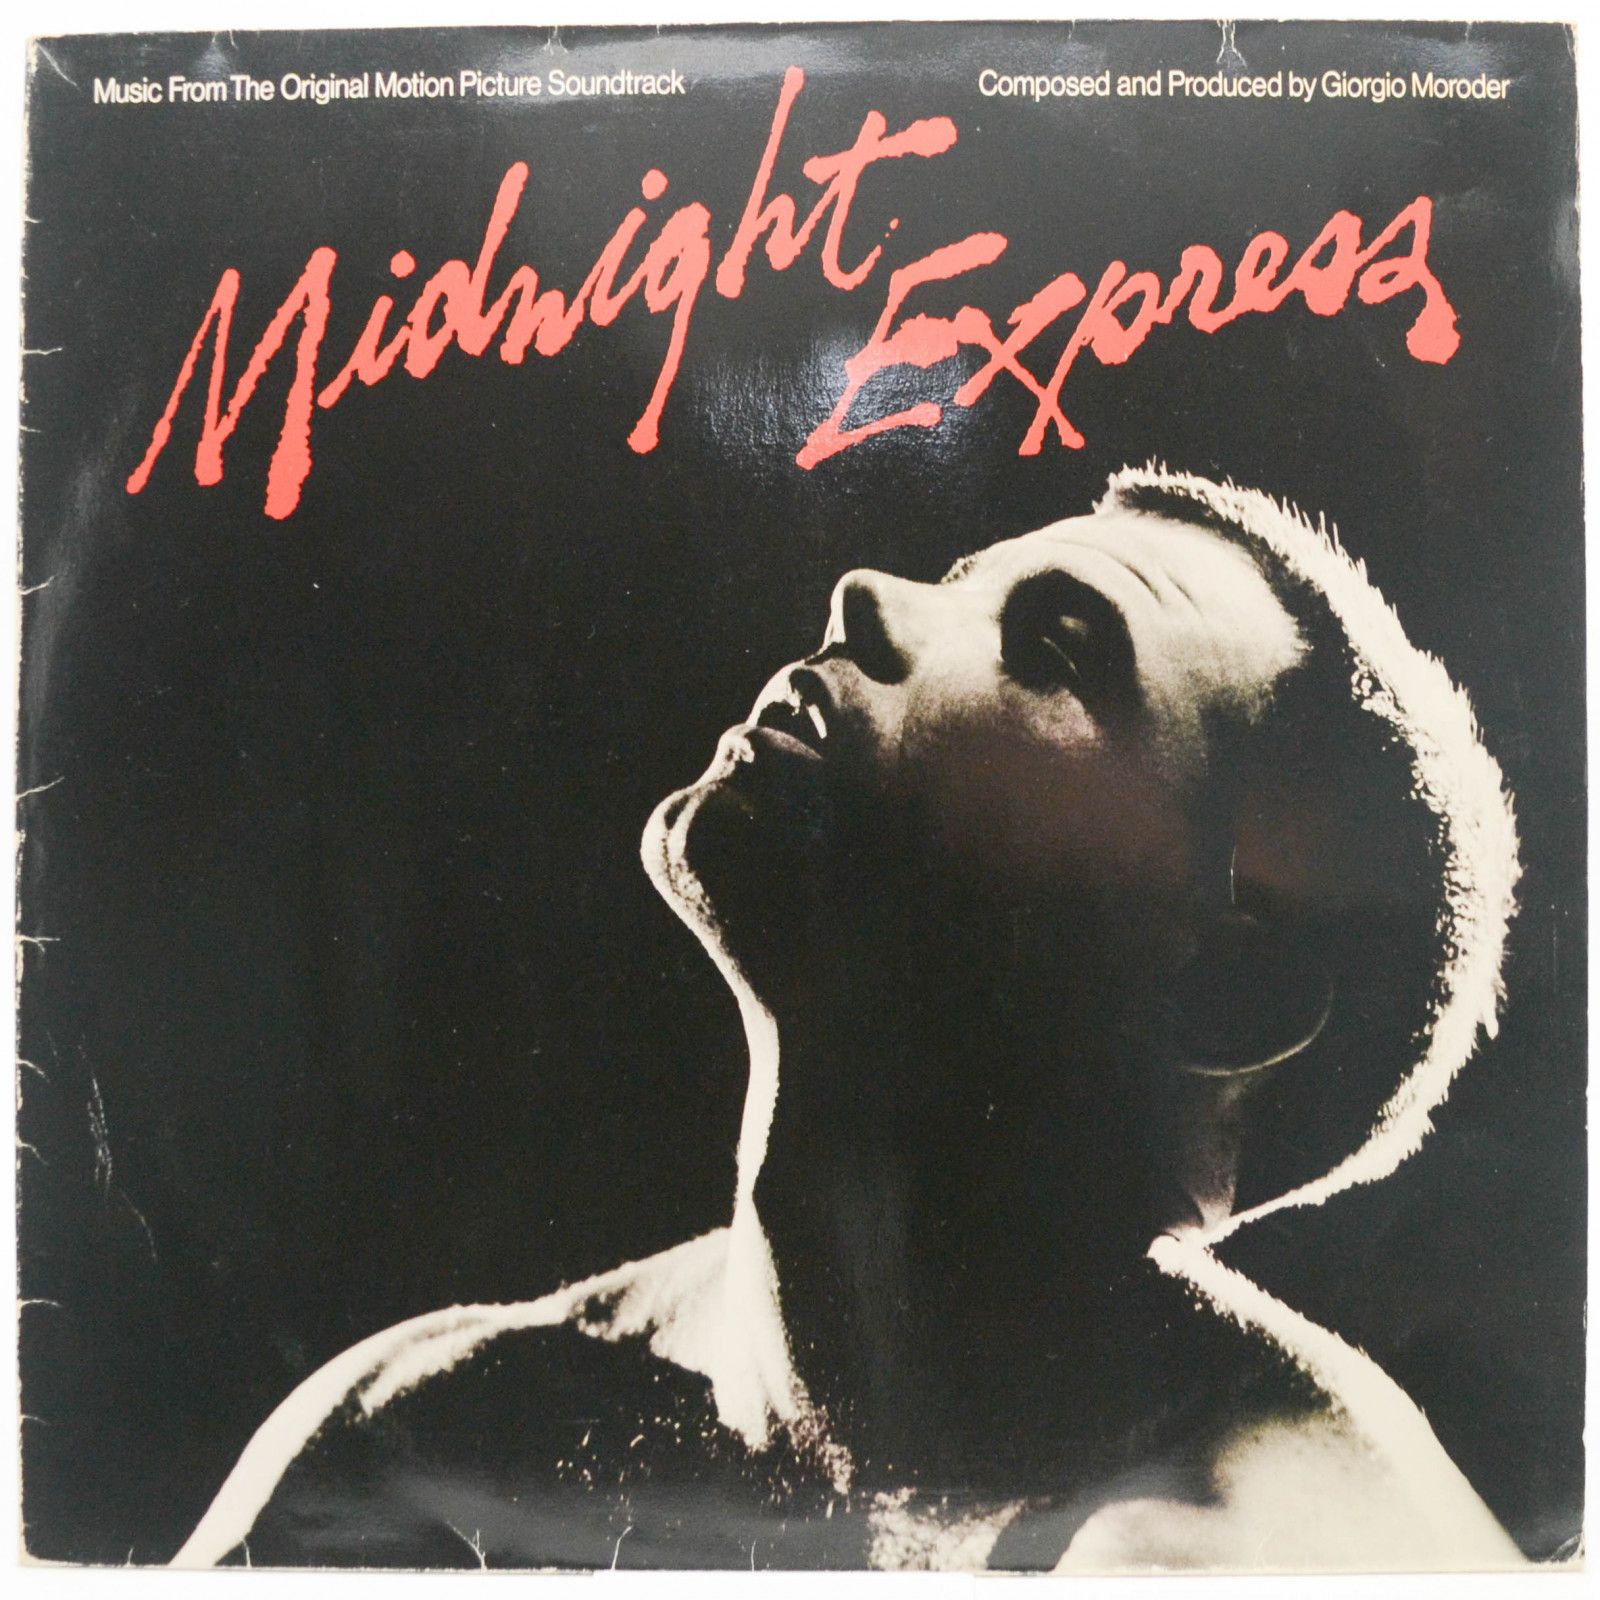 Giorgio Moroder — Midnight Express (Music From The Original Motion Picture Soundtrack), 1978